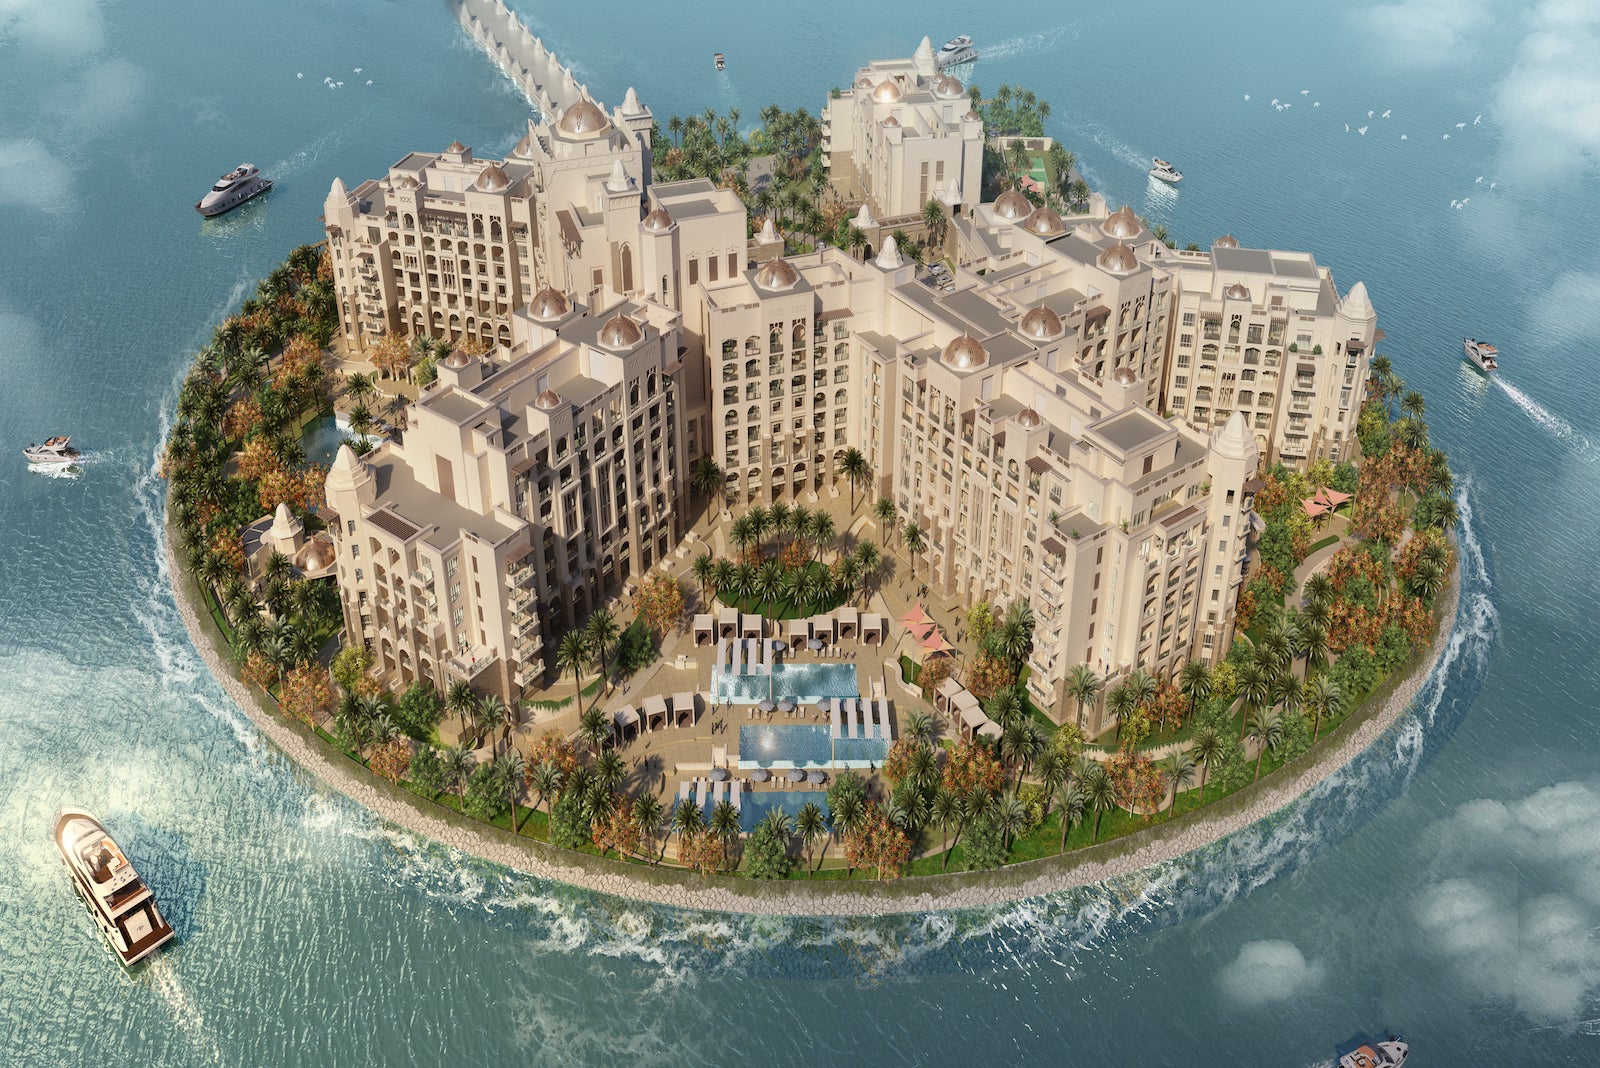 St. Regis will open 11 new resorts around the world by 2025 The